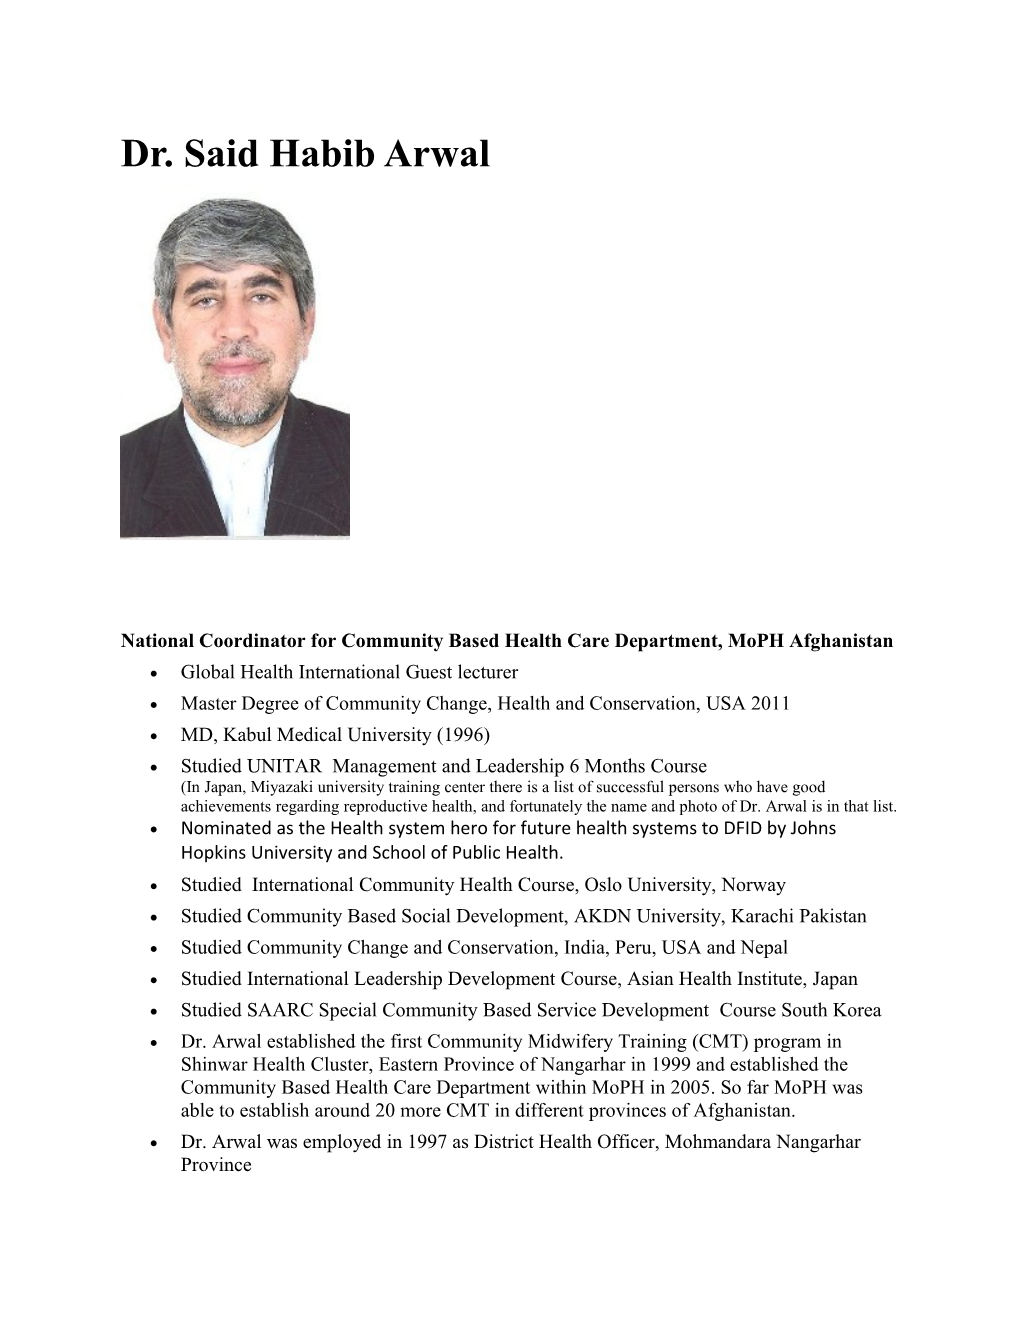 National Coordinator for Community Based Health Care Department, Moph Afghanistan